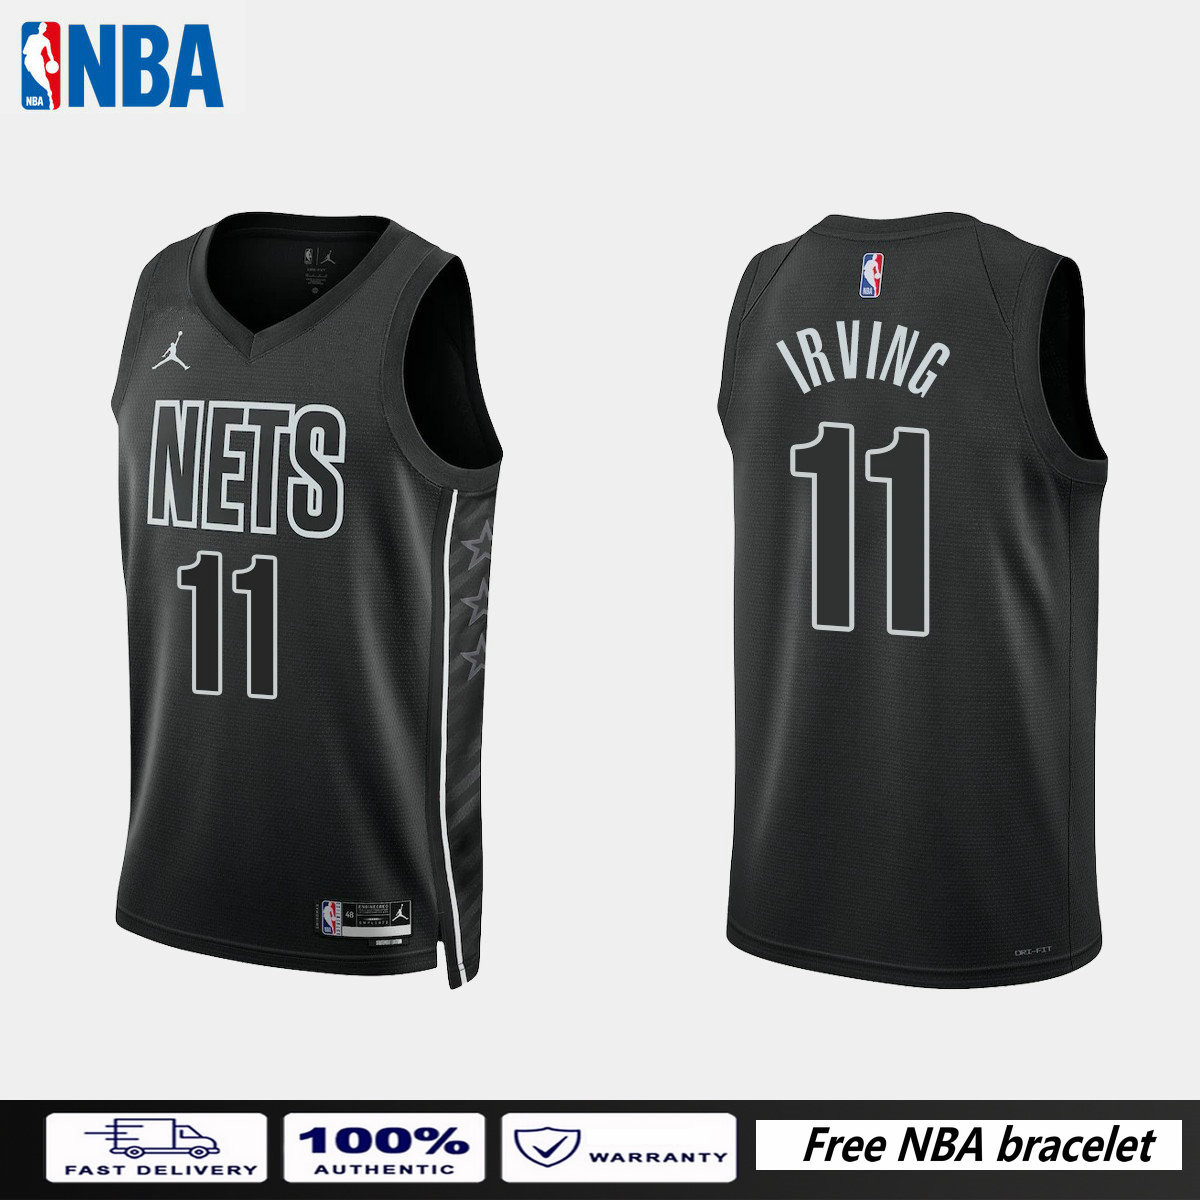 Kyrie Irving Brooklyn Nets Fanatics Authentic Player-Issued #11 Black Jersey  from the 2022-23 NBA Season